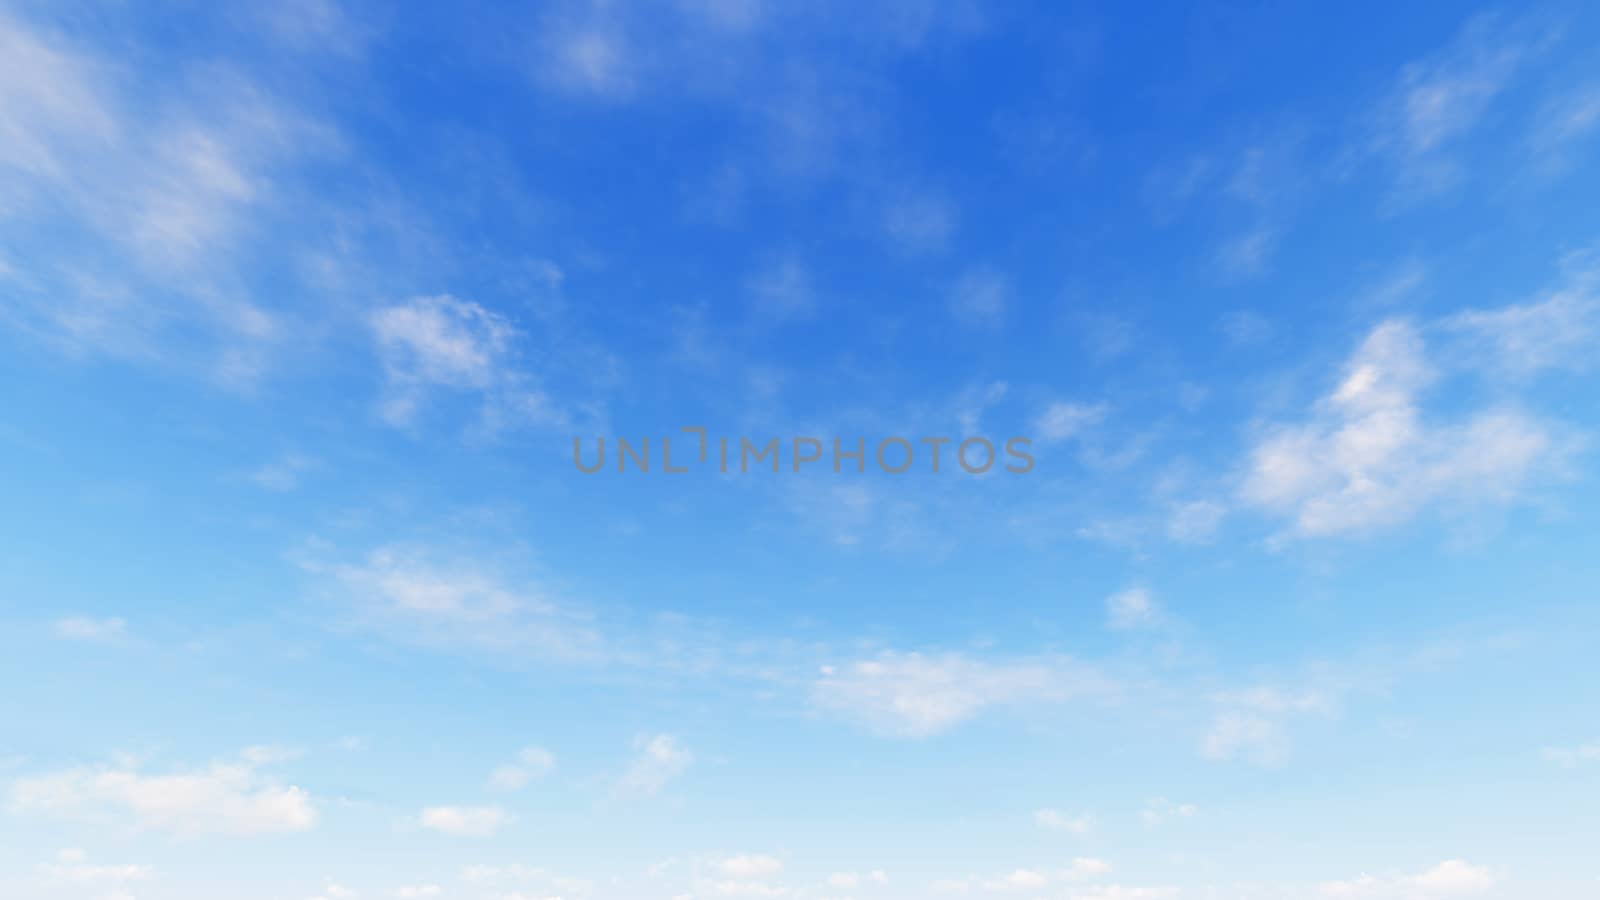 Cloudy blue sky abstract background, blue sky background with tiny clouds, 3d rendering

